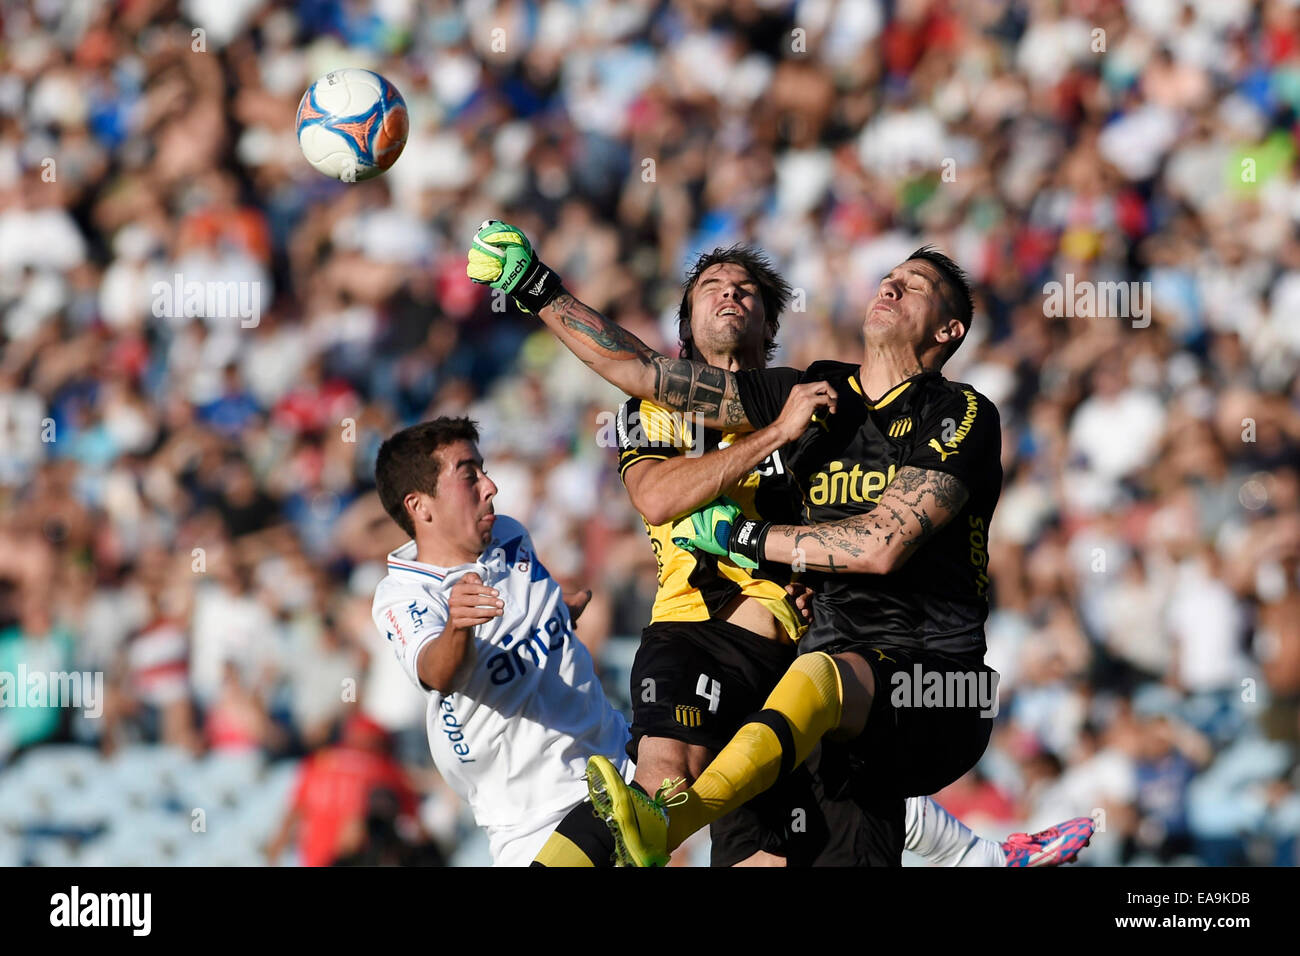 Montevideo, Uruguay. 9th Nov, 2014. Carlos de Pena (L) of Nacional vies for the ball with goalkeeper Pablo Migliore (R) and Gonzalo Viera of Penarol during their match in the Centenario Stadium, in Montevideo, capital of Uruguay, on Nov. 9, 2014. Credit:  Nicolas Celaya/Xinhua/Alamy Live News Stock Photo